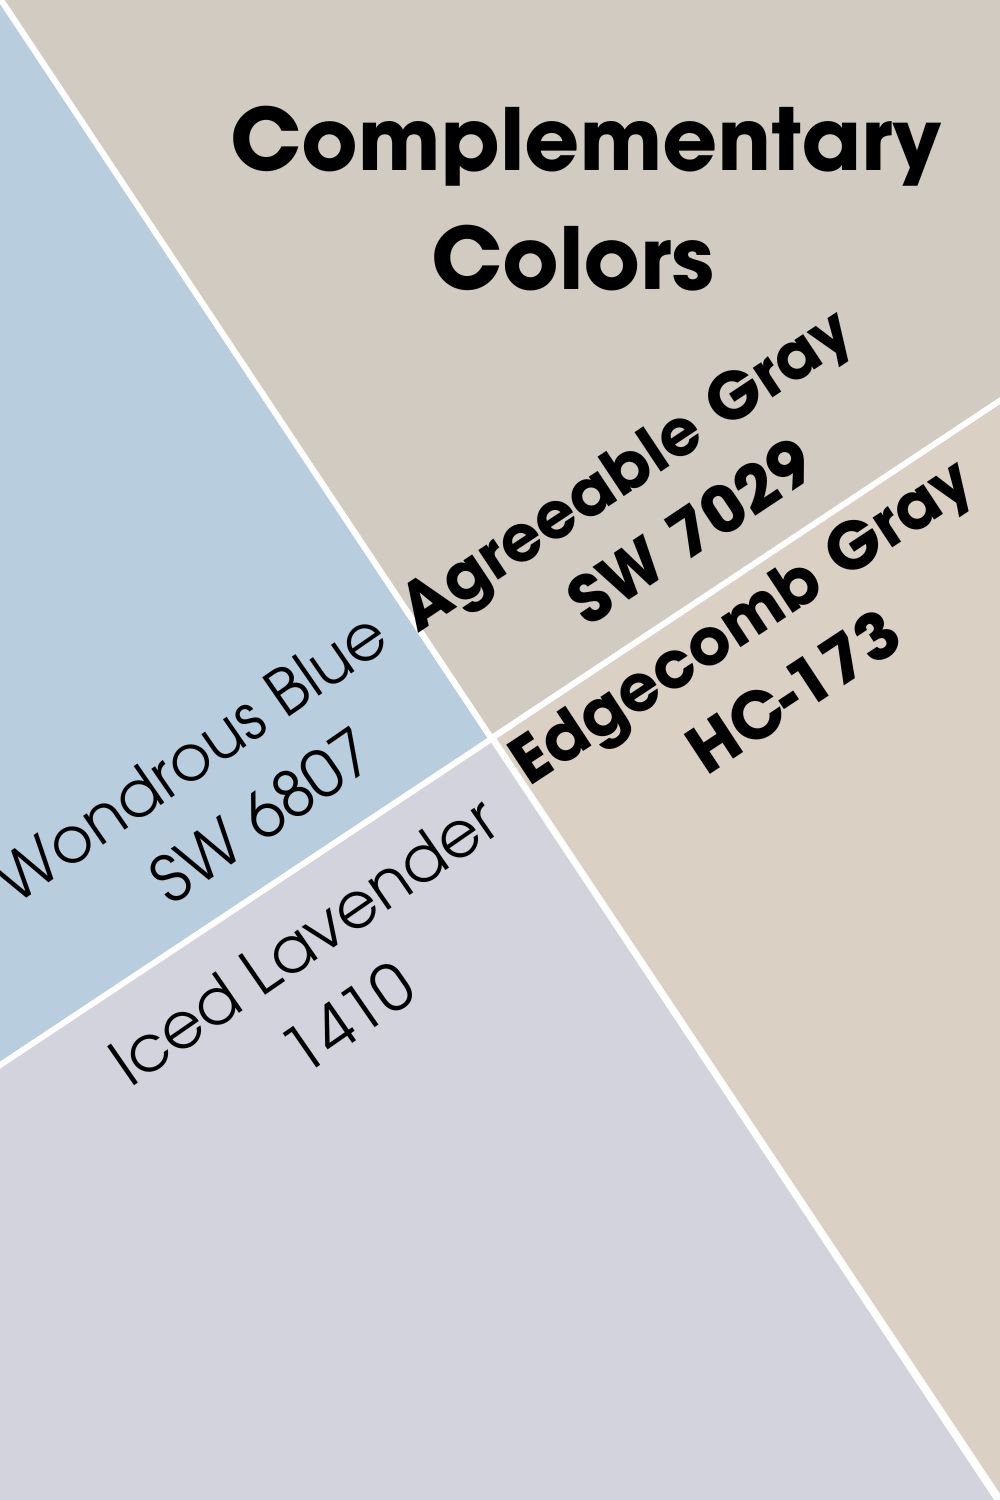 Agreeable Gray vs. Edgecomb Gray Complementary Colors